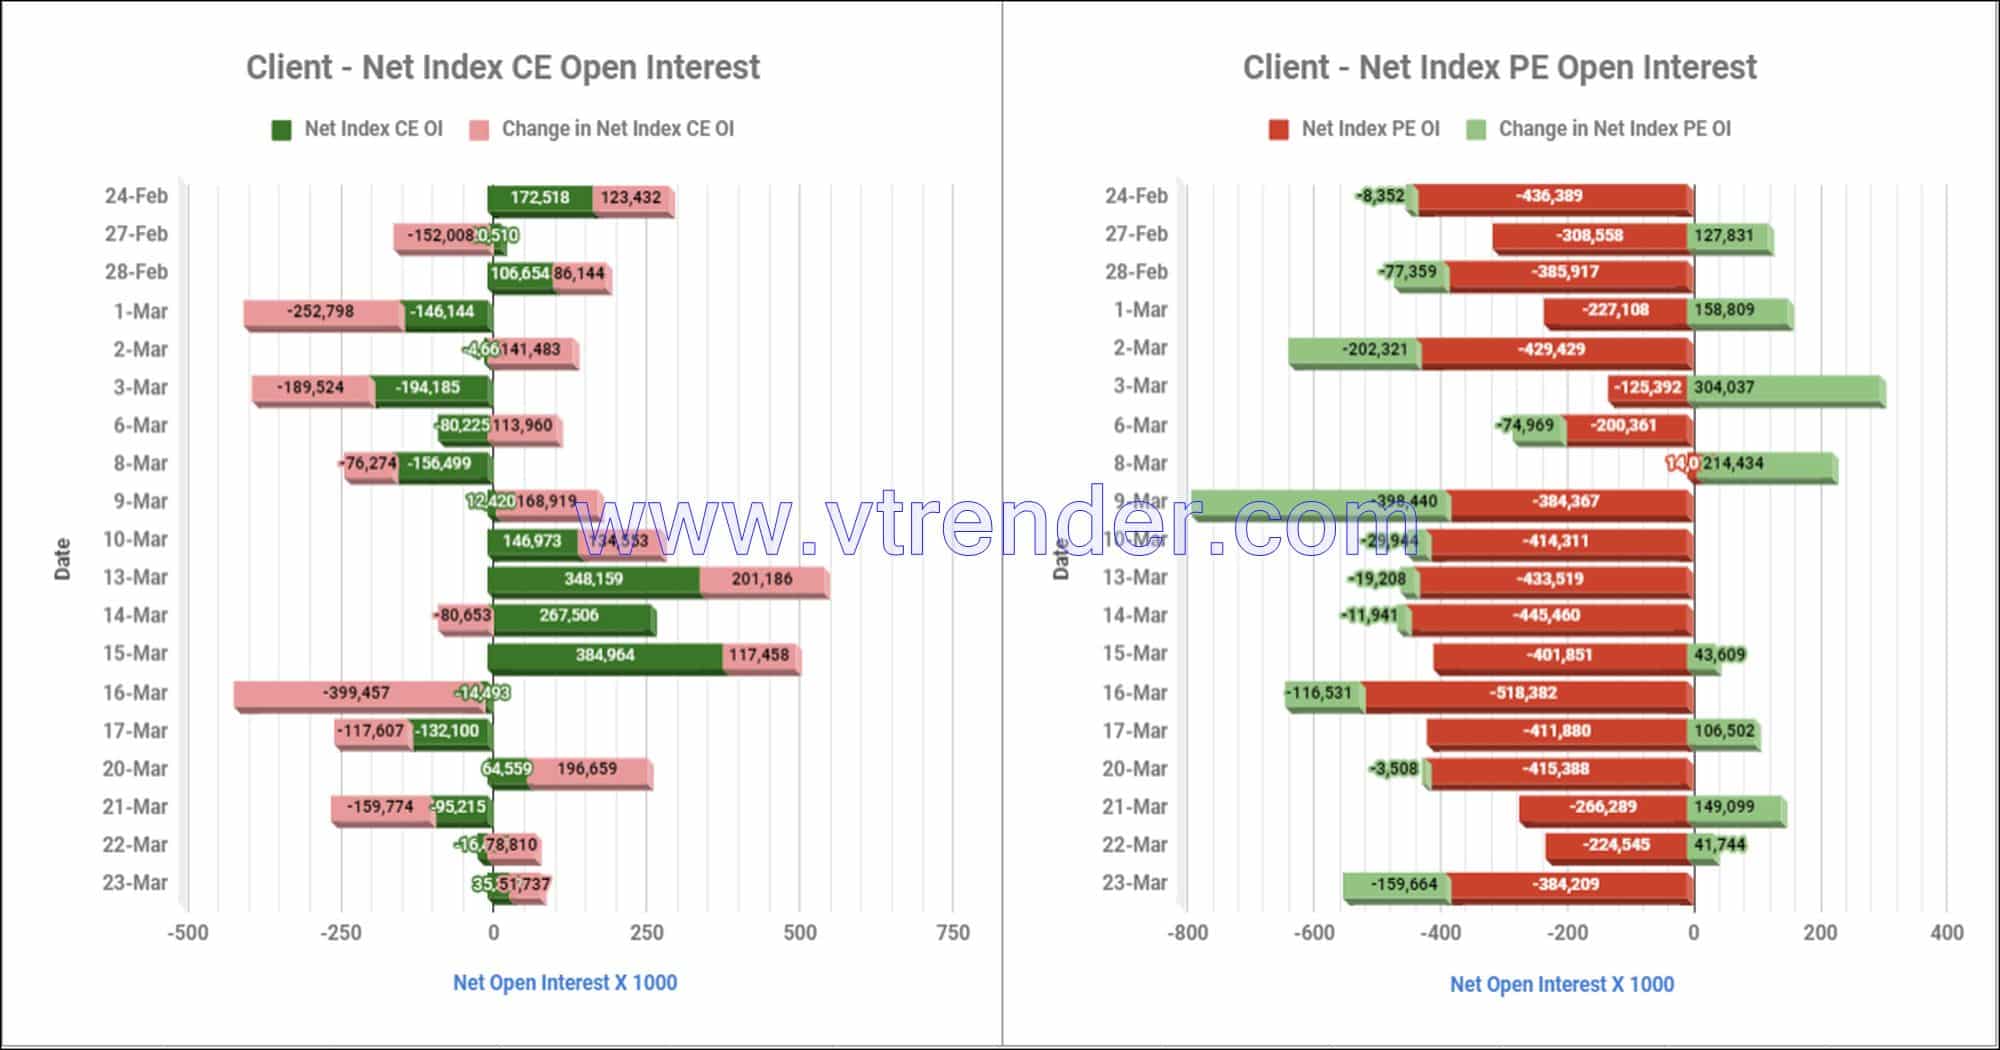 Clientinop23Mar Participantwise Net Open Interest And Net Equity Investments – 23Rd Mar 2023 Client, Equity, Fii, Index Futures, Index Options, Open Interest, Prop